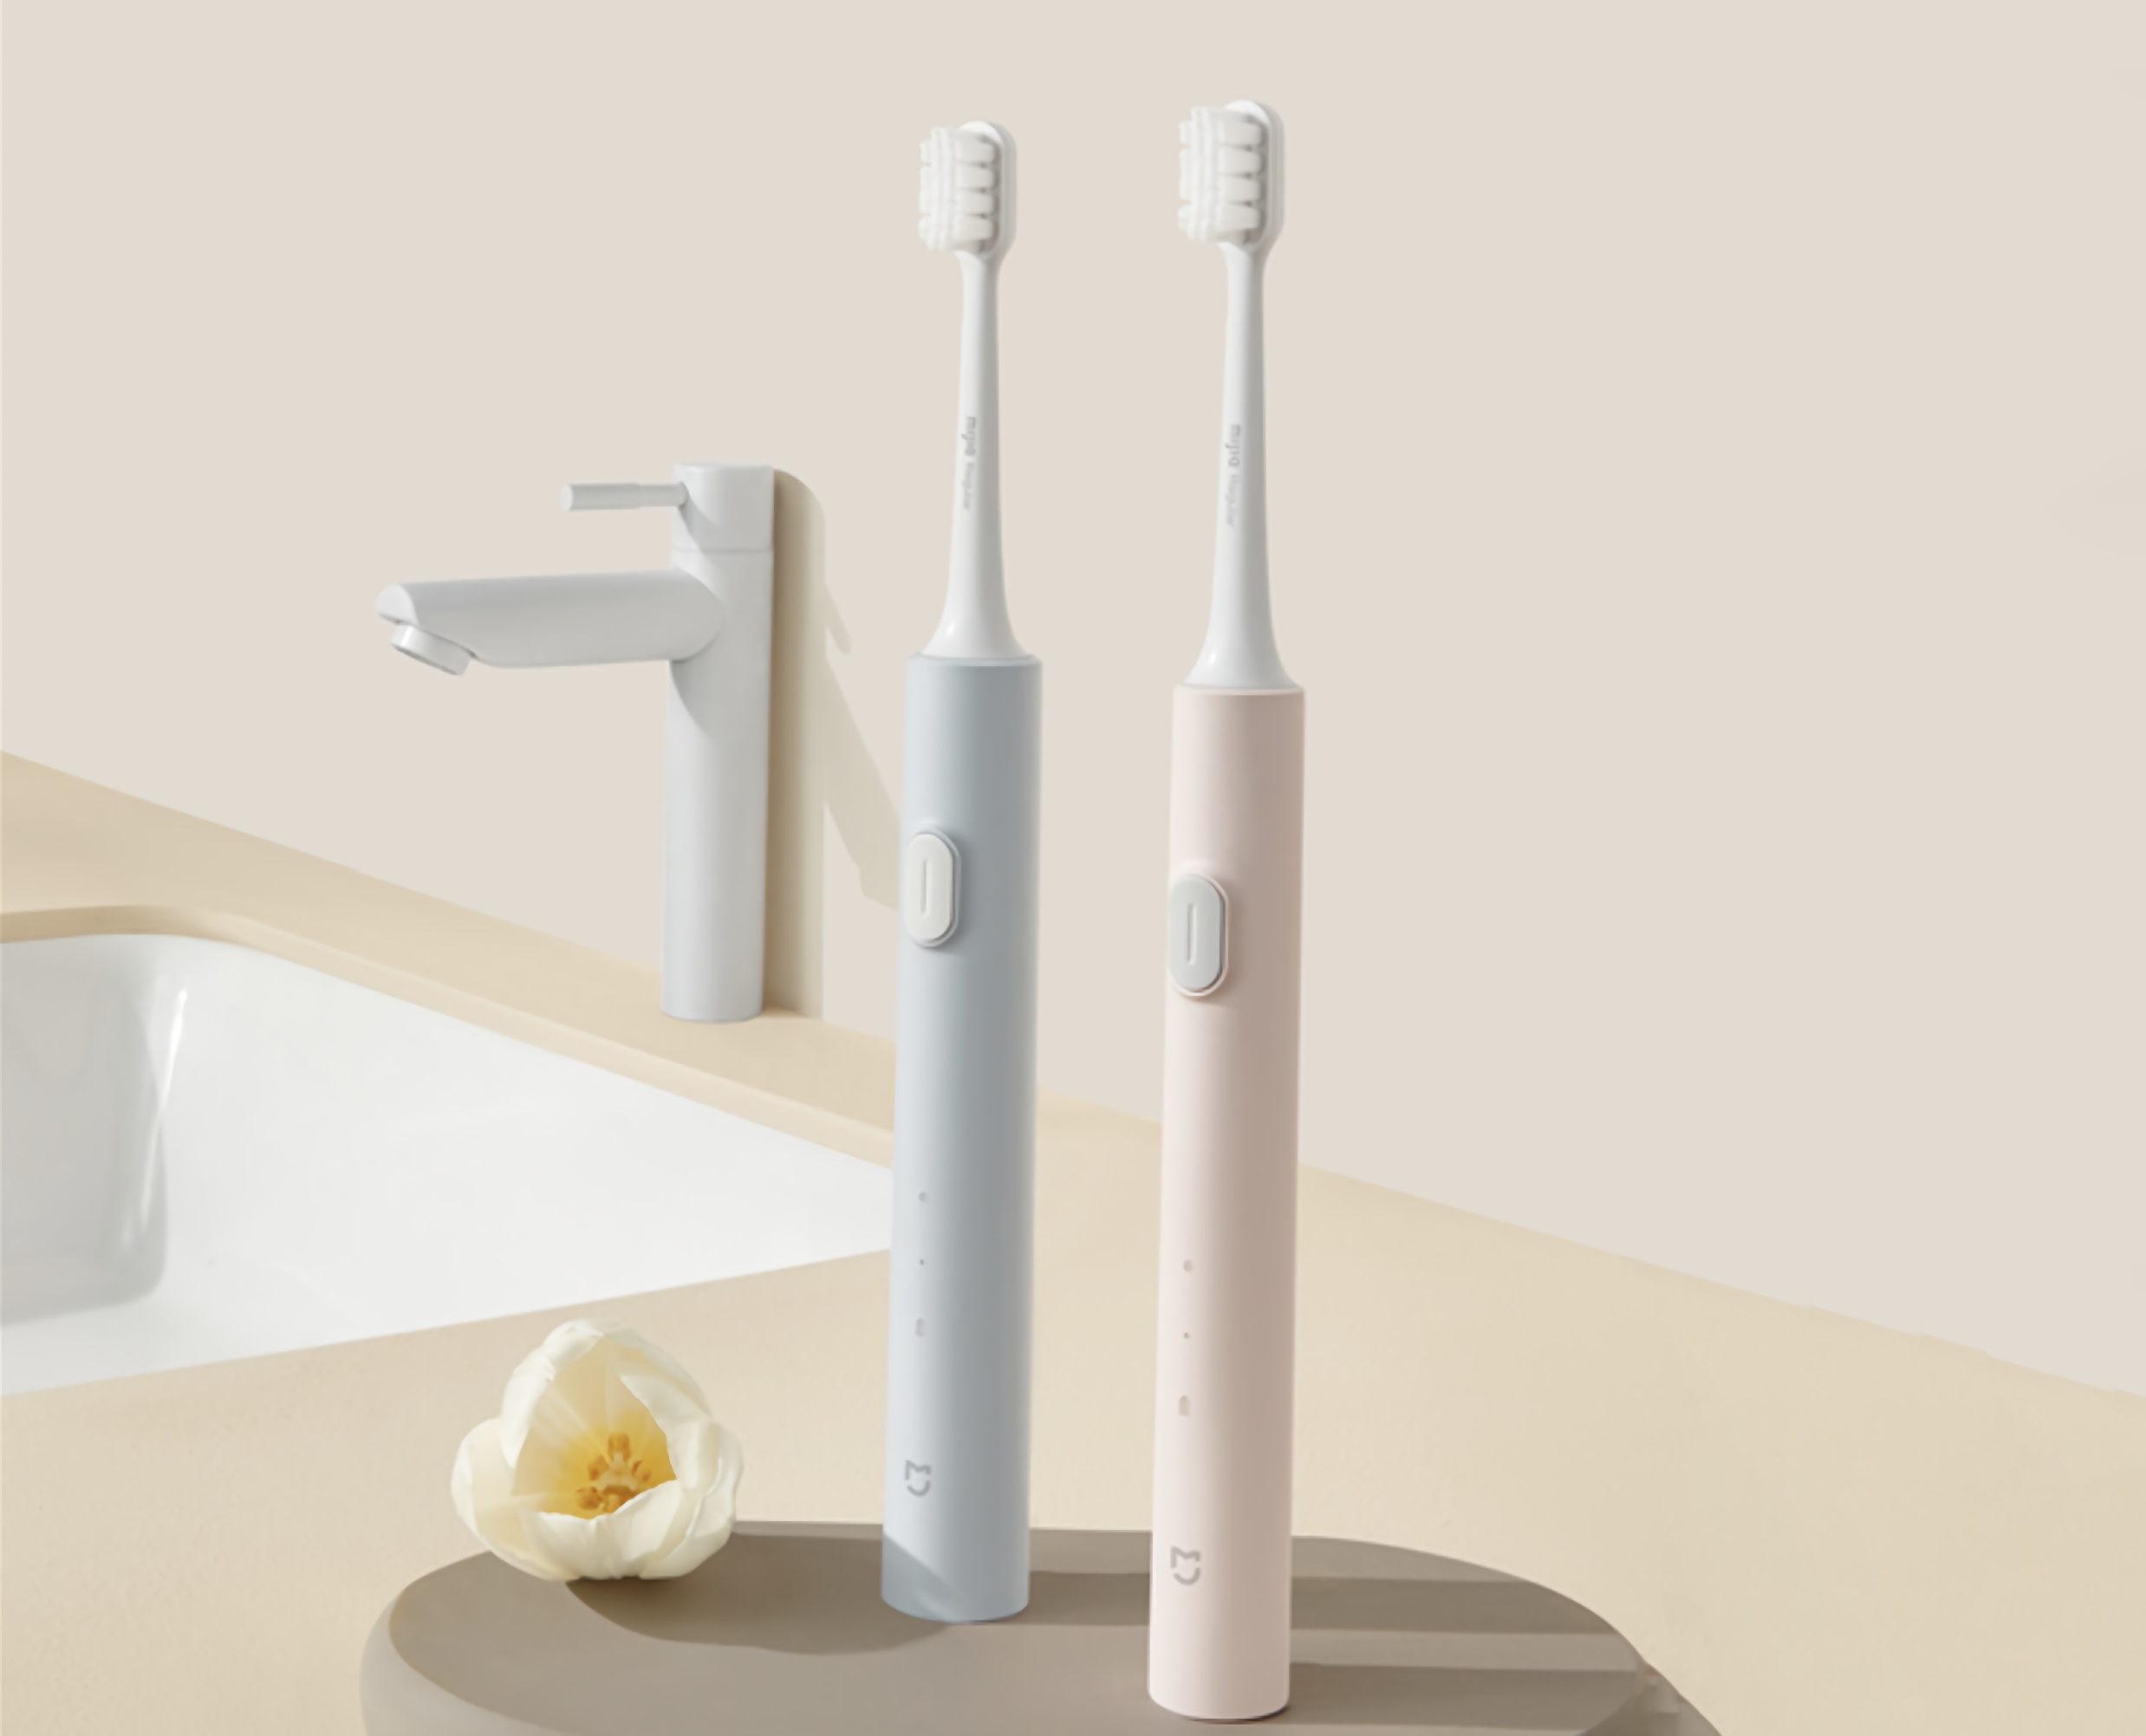 MiJia T200 Sonic Electric Toothbrush: an electric toothbrush from the Xiaomi ecosystem with an autonomy of up to 25 days